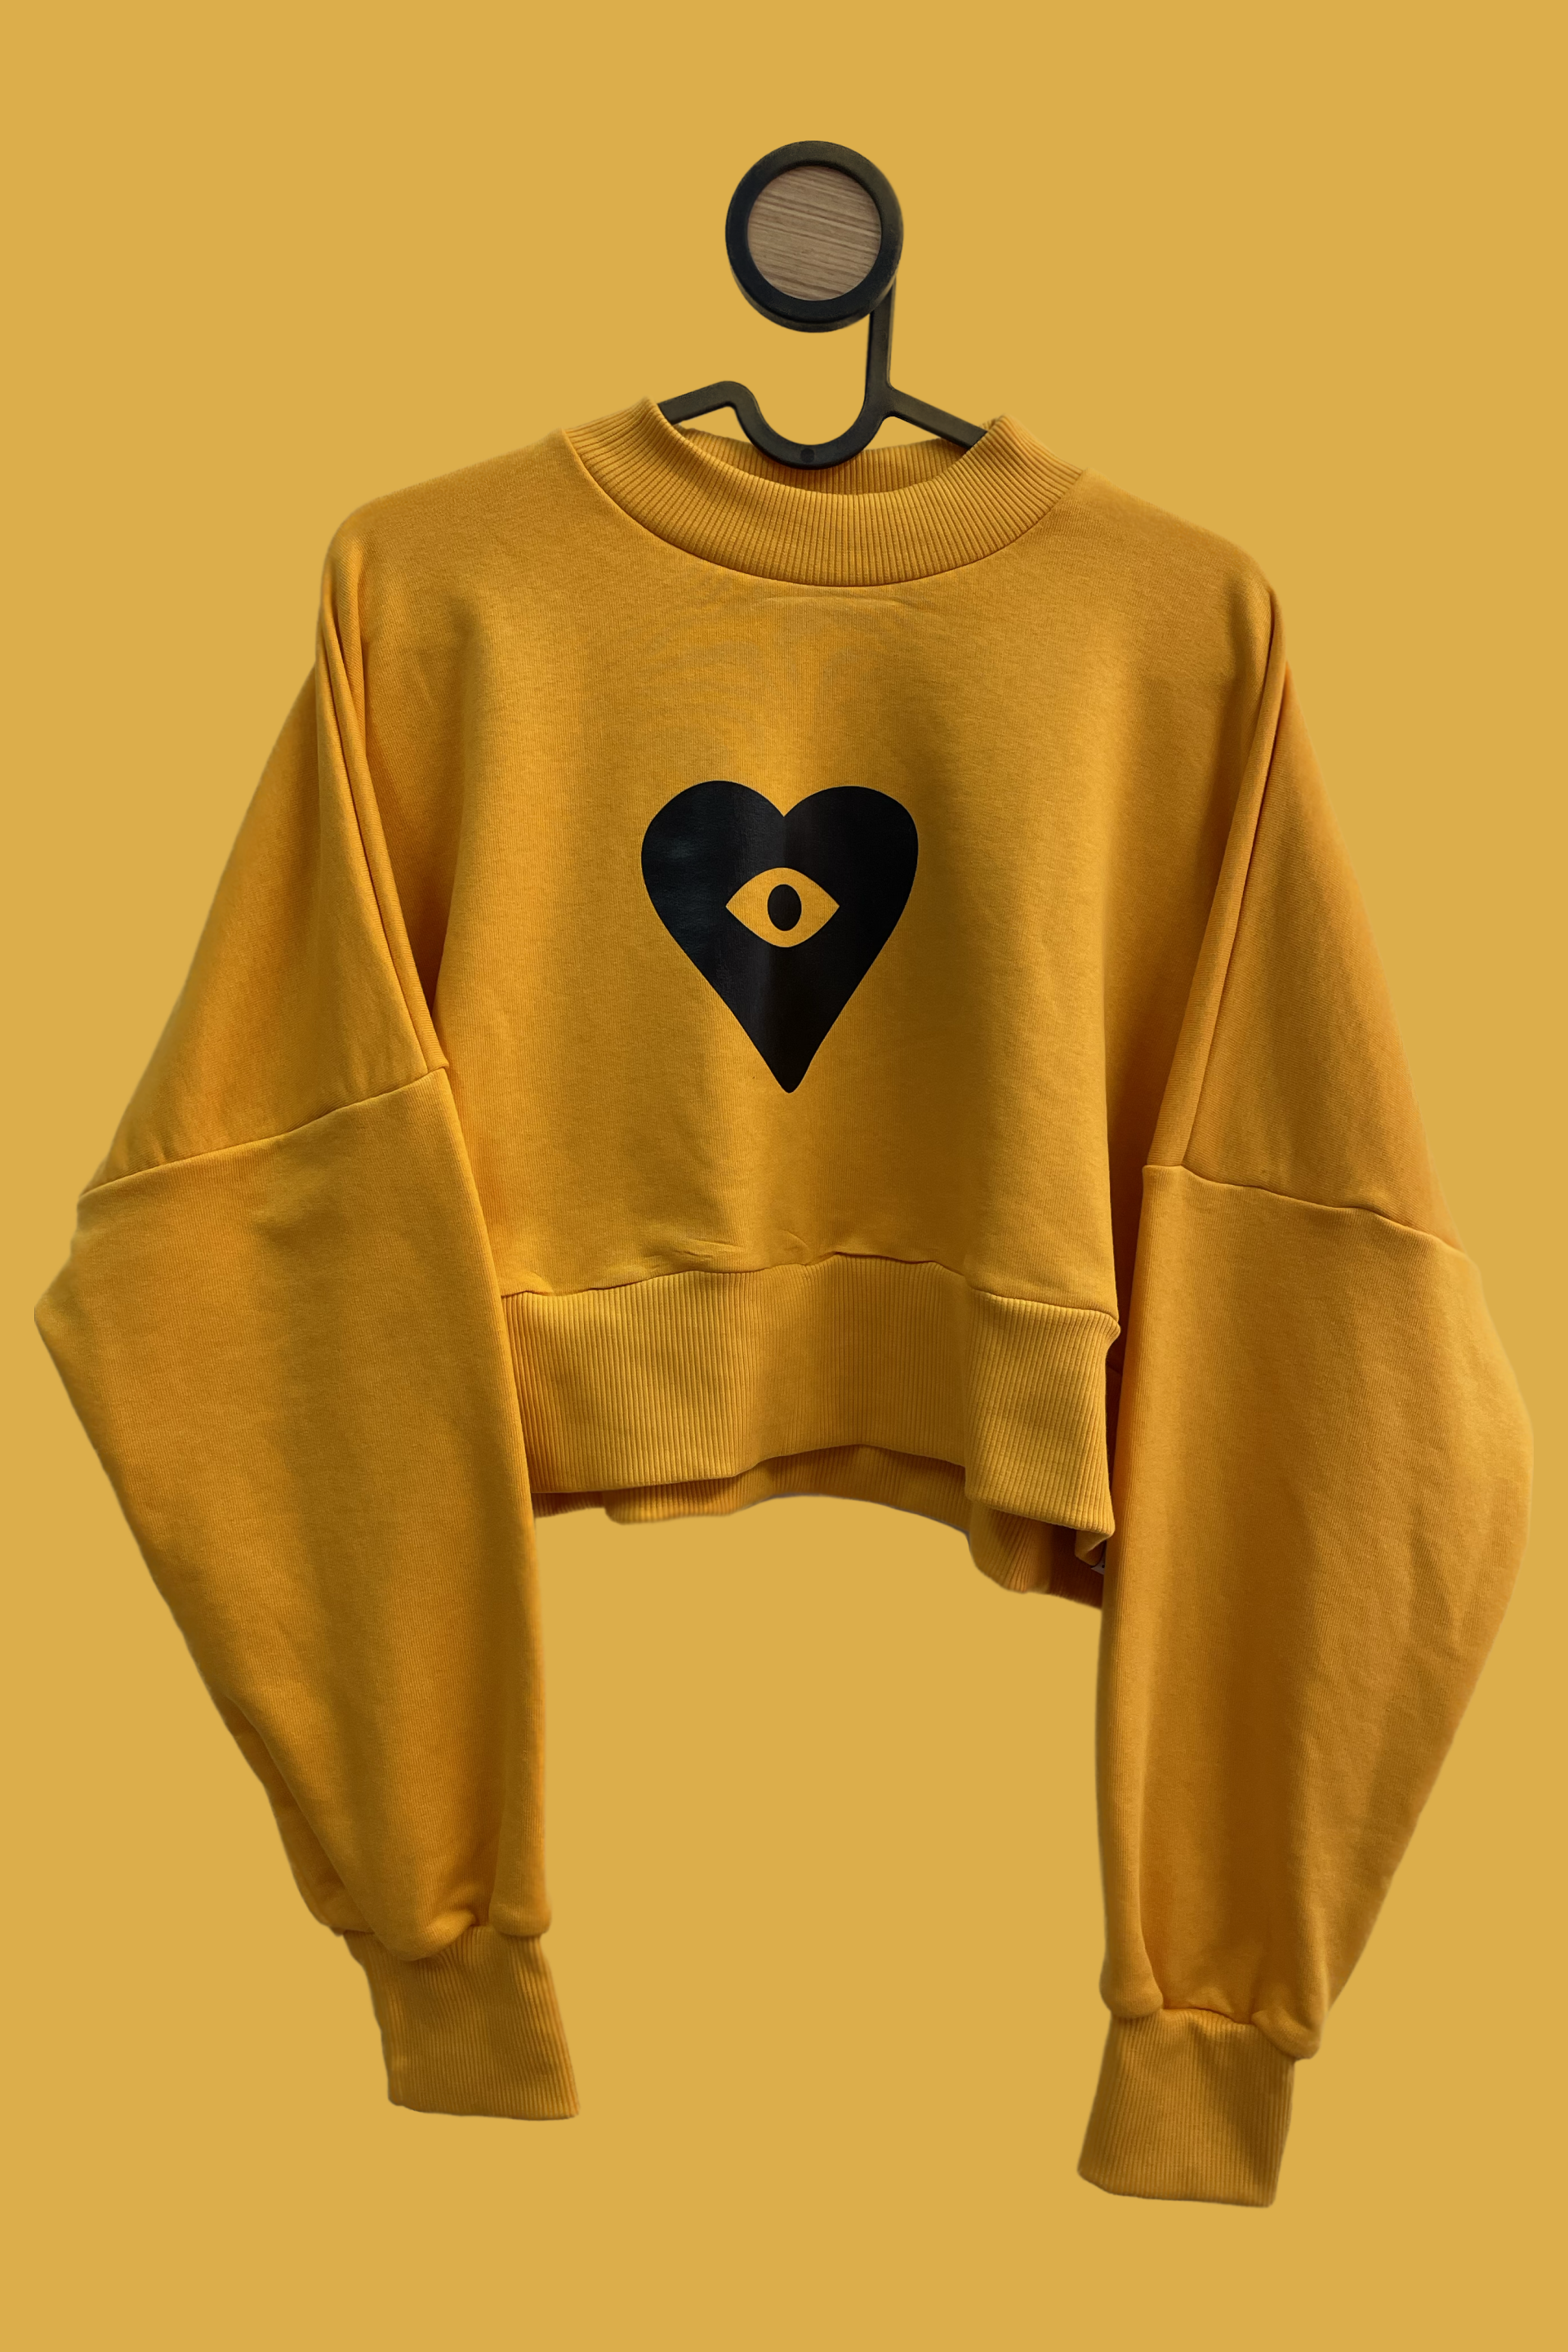 CROPPED SWEATSHIRT CHILLY WILLY- HEART (VINYL)